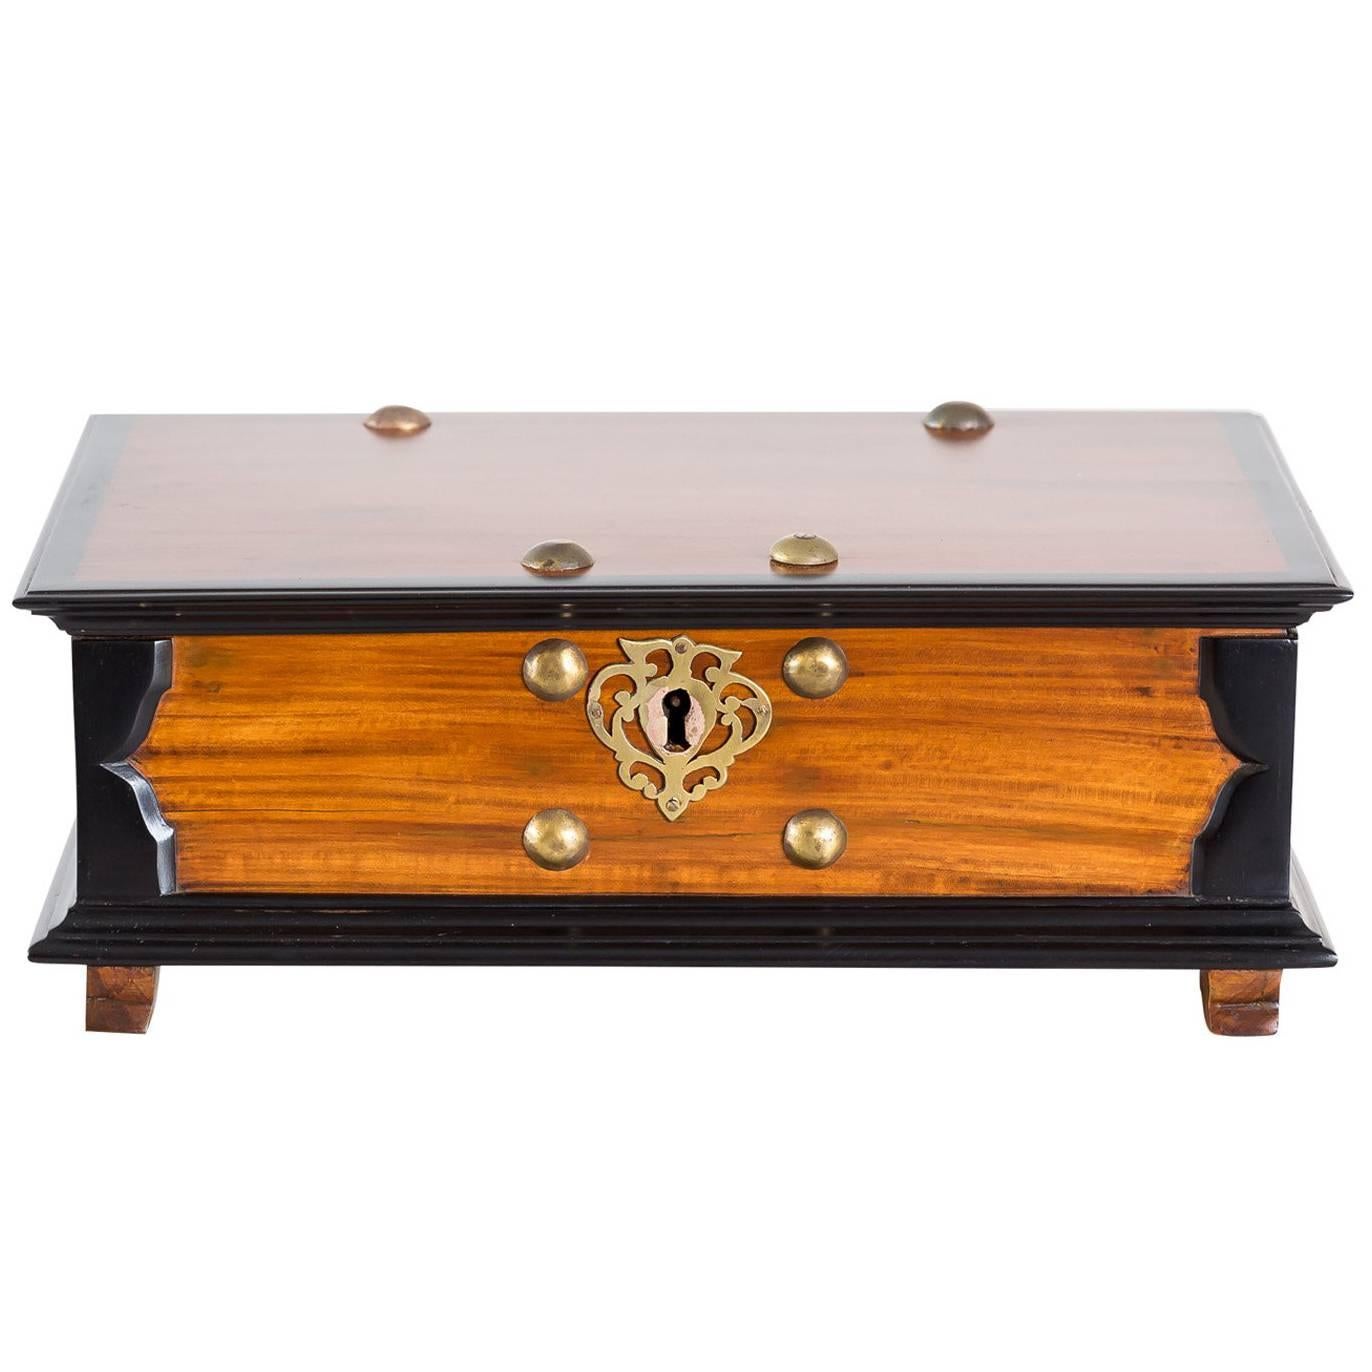 Antique Indo-Dutch or Dutch Colonial Satinwood and Ebony box For Sale